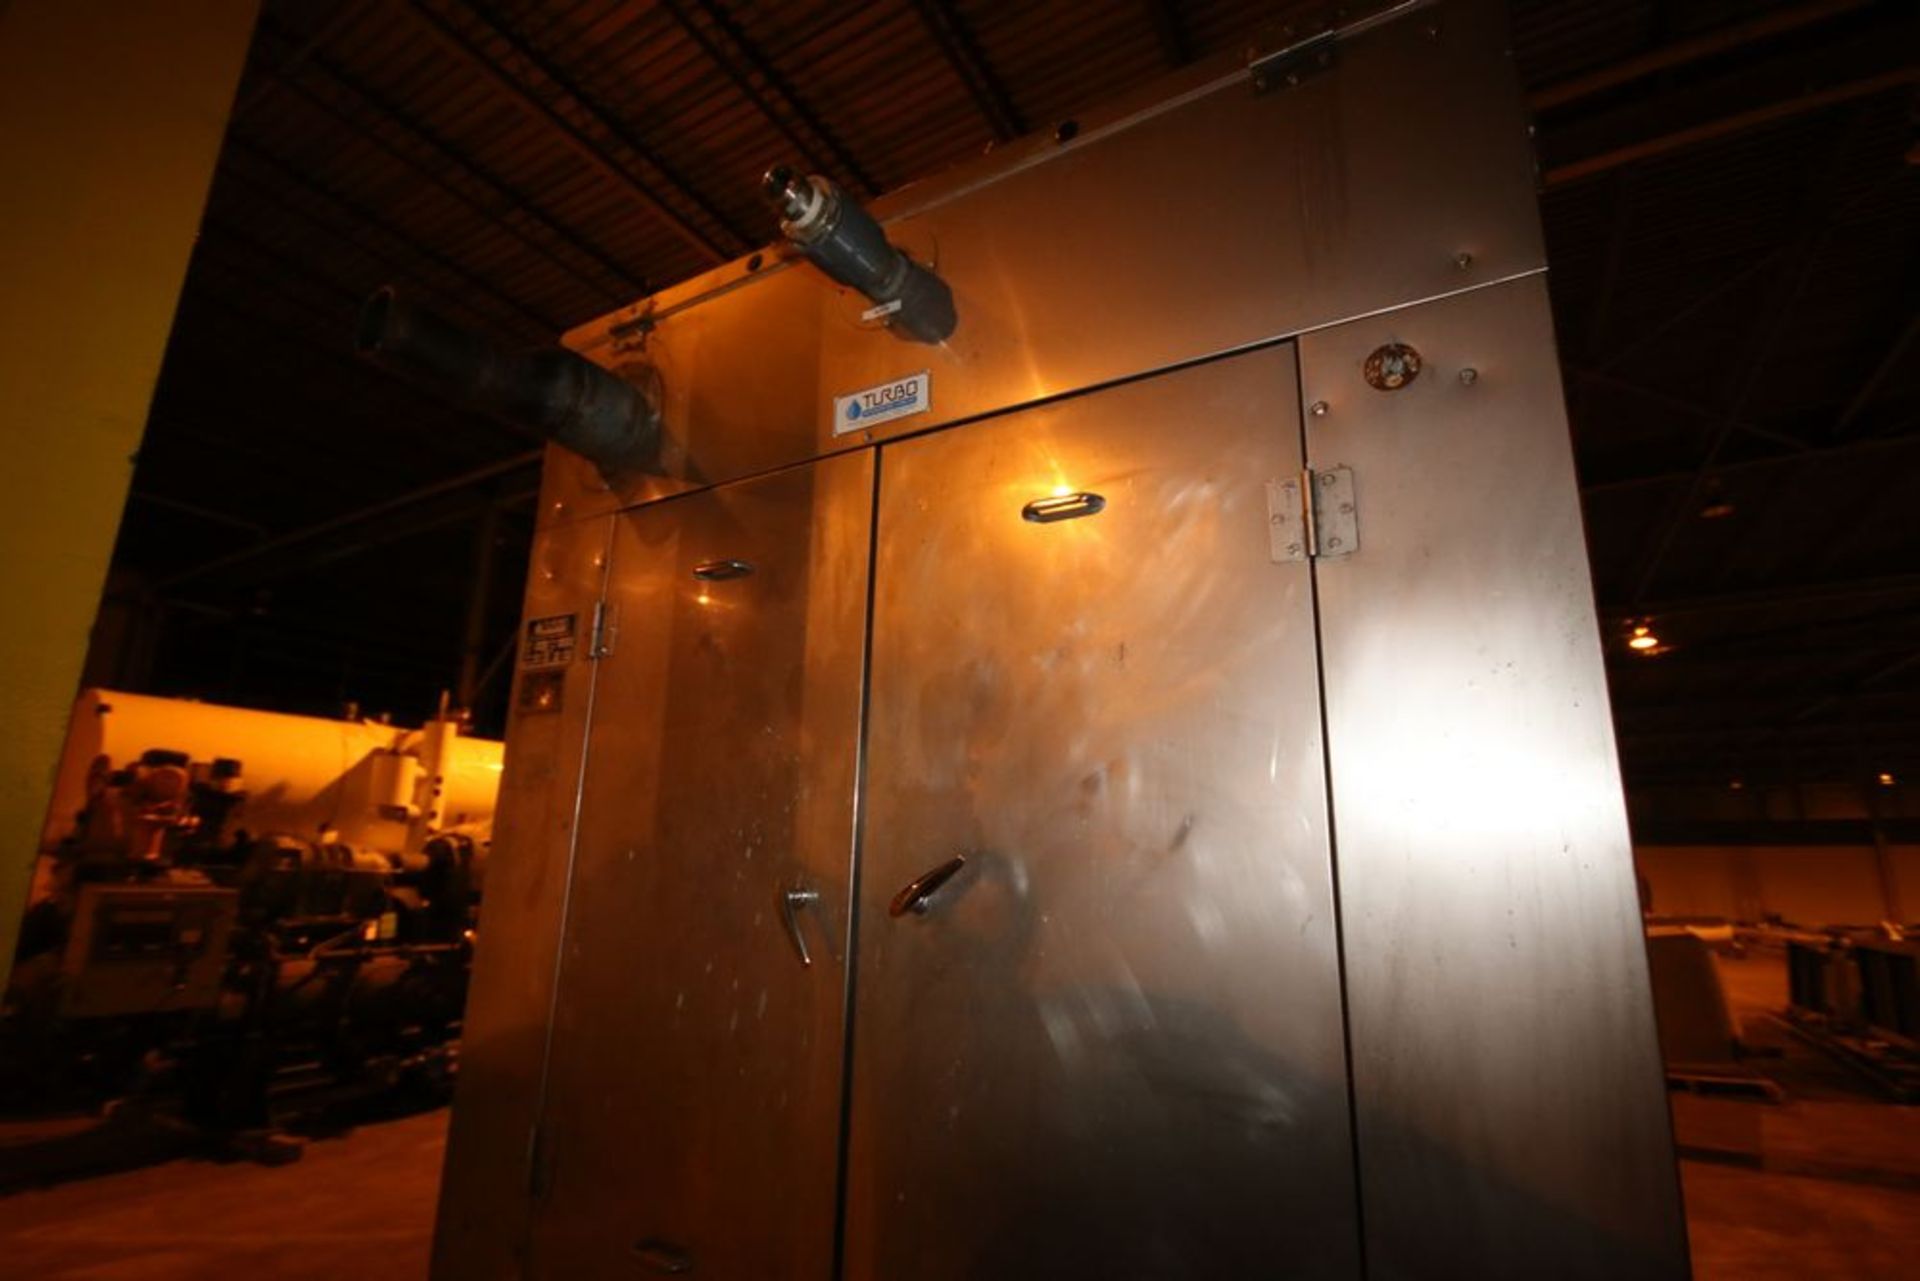 Turbo S/S Chiller, M/N HTDA 480602, S/N 940540 (LOCATED IN BROCKPORT, N.Y.) & (CONTACT GARY ROGERS - Image 8 of 8